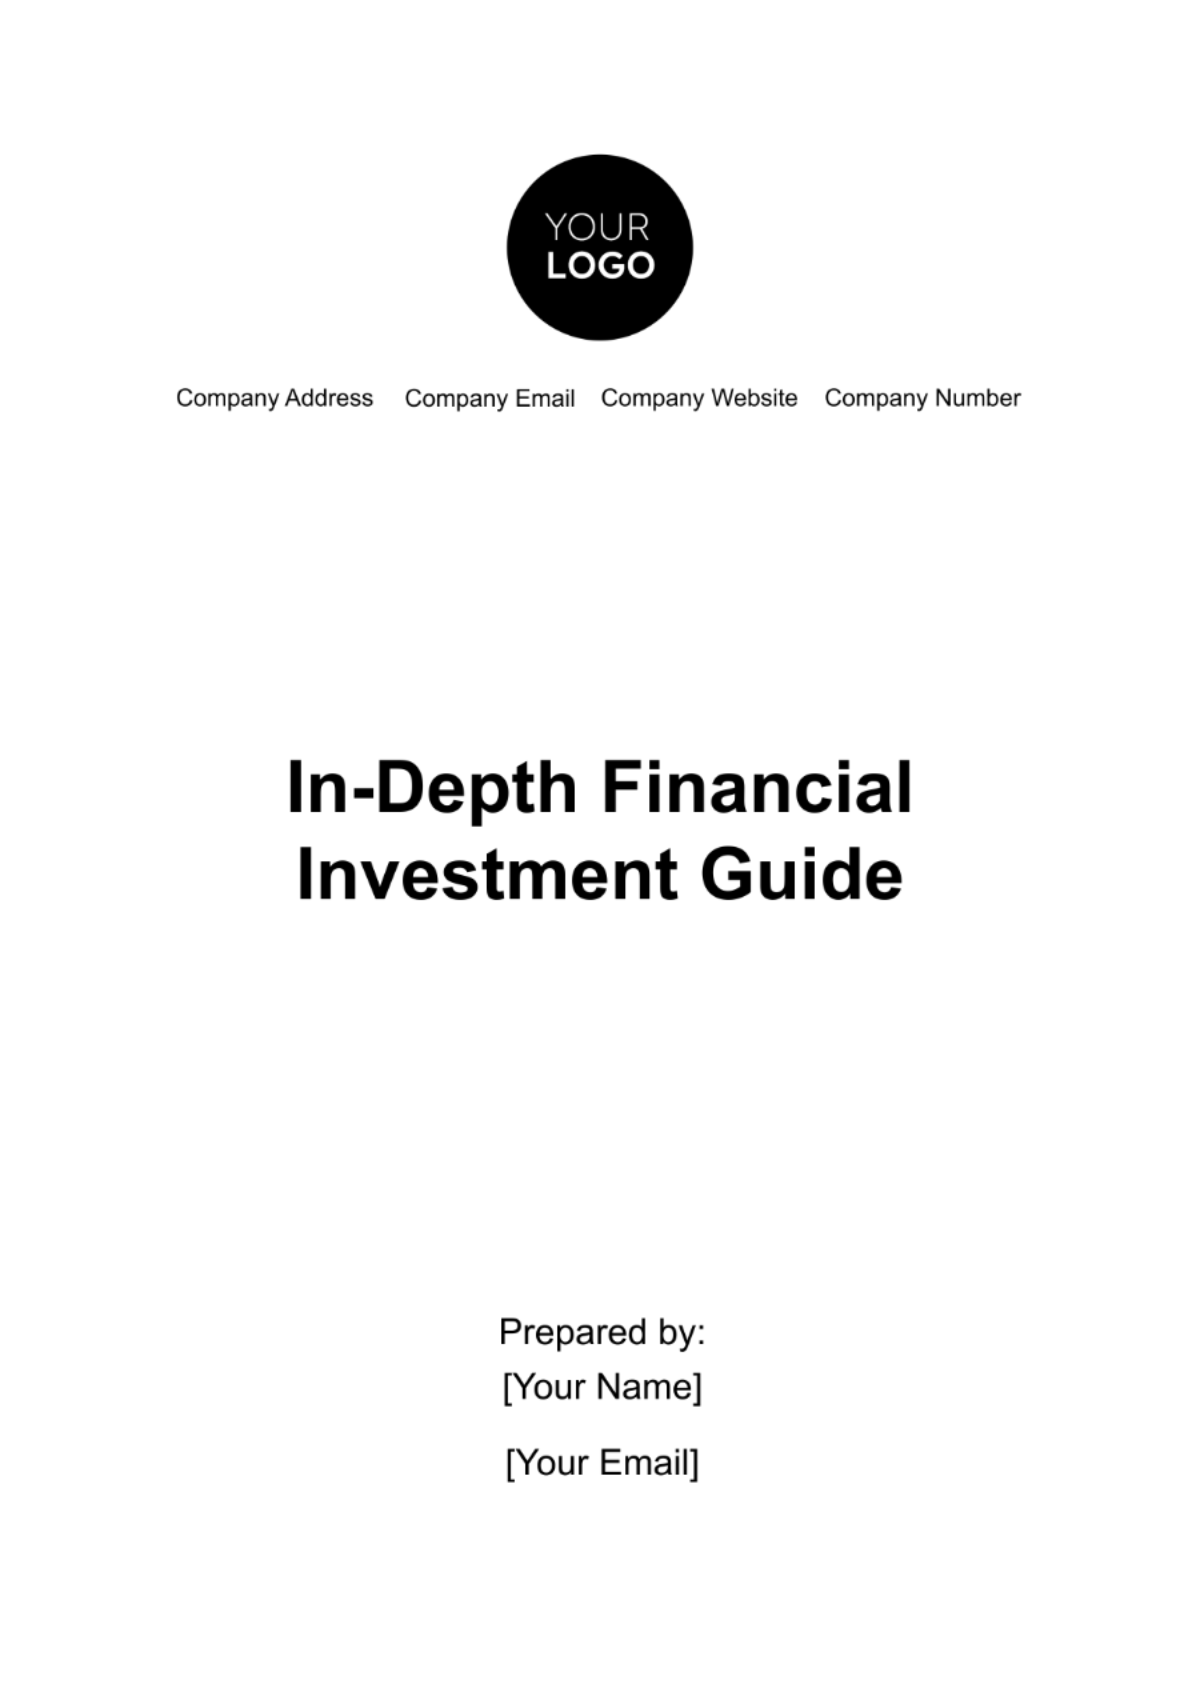 In-Depth Financial Investment Guide Template